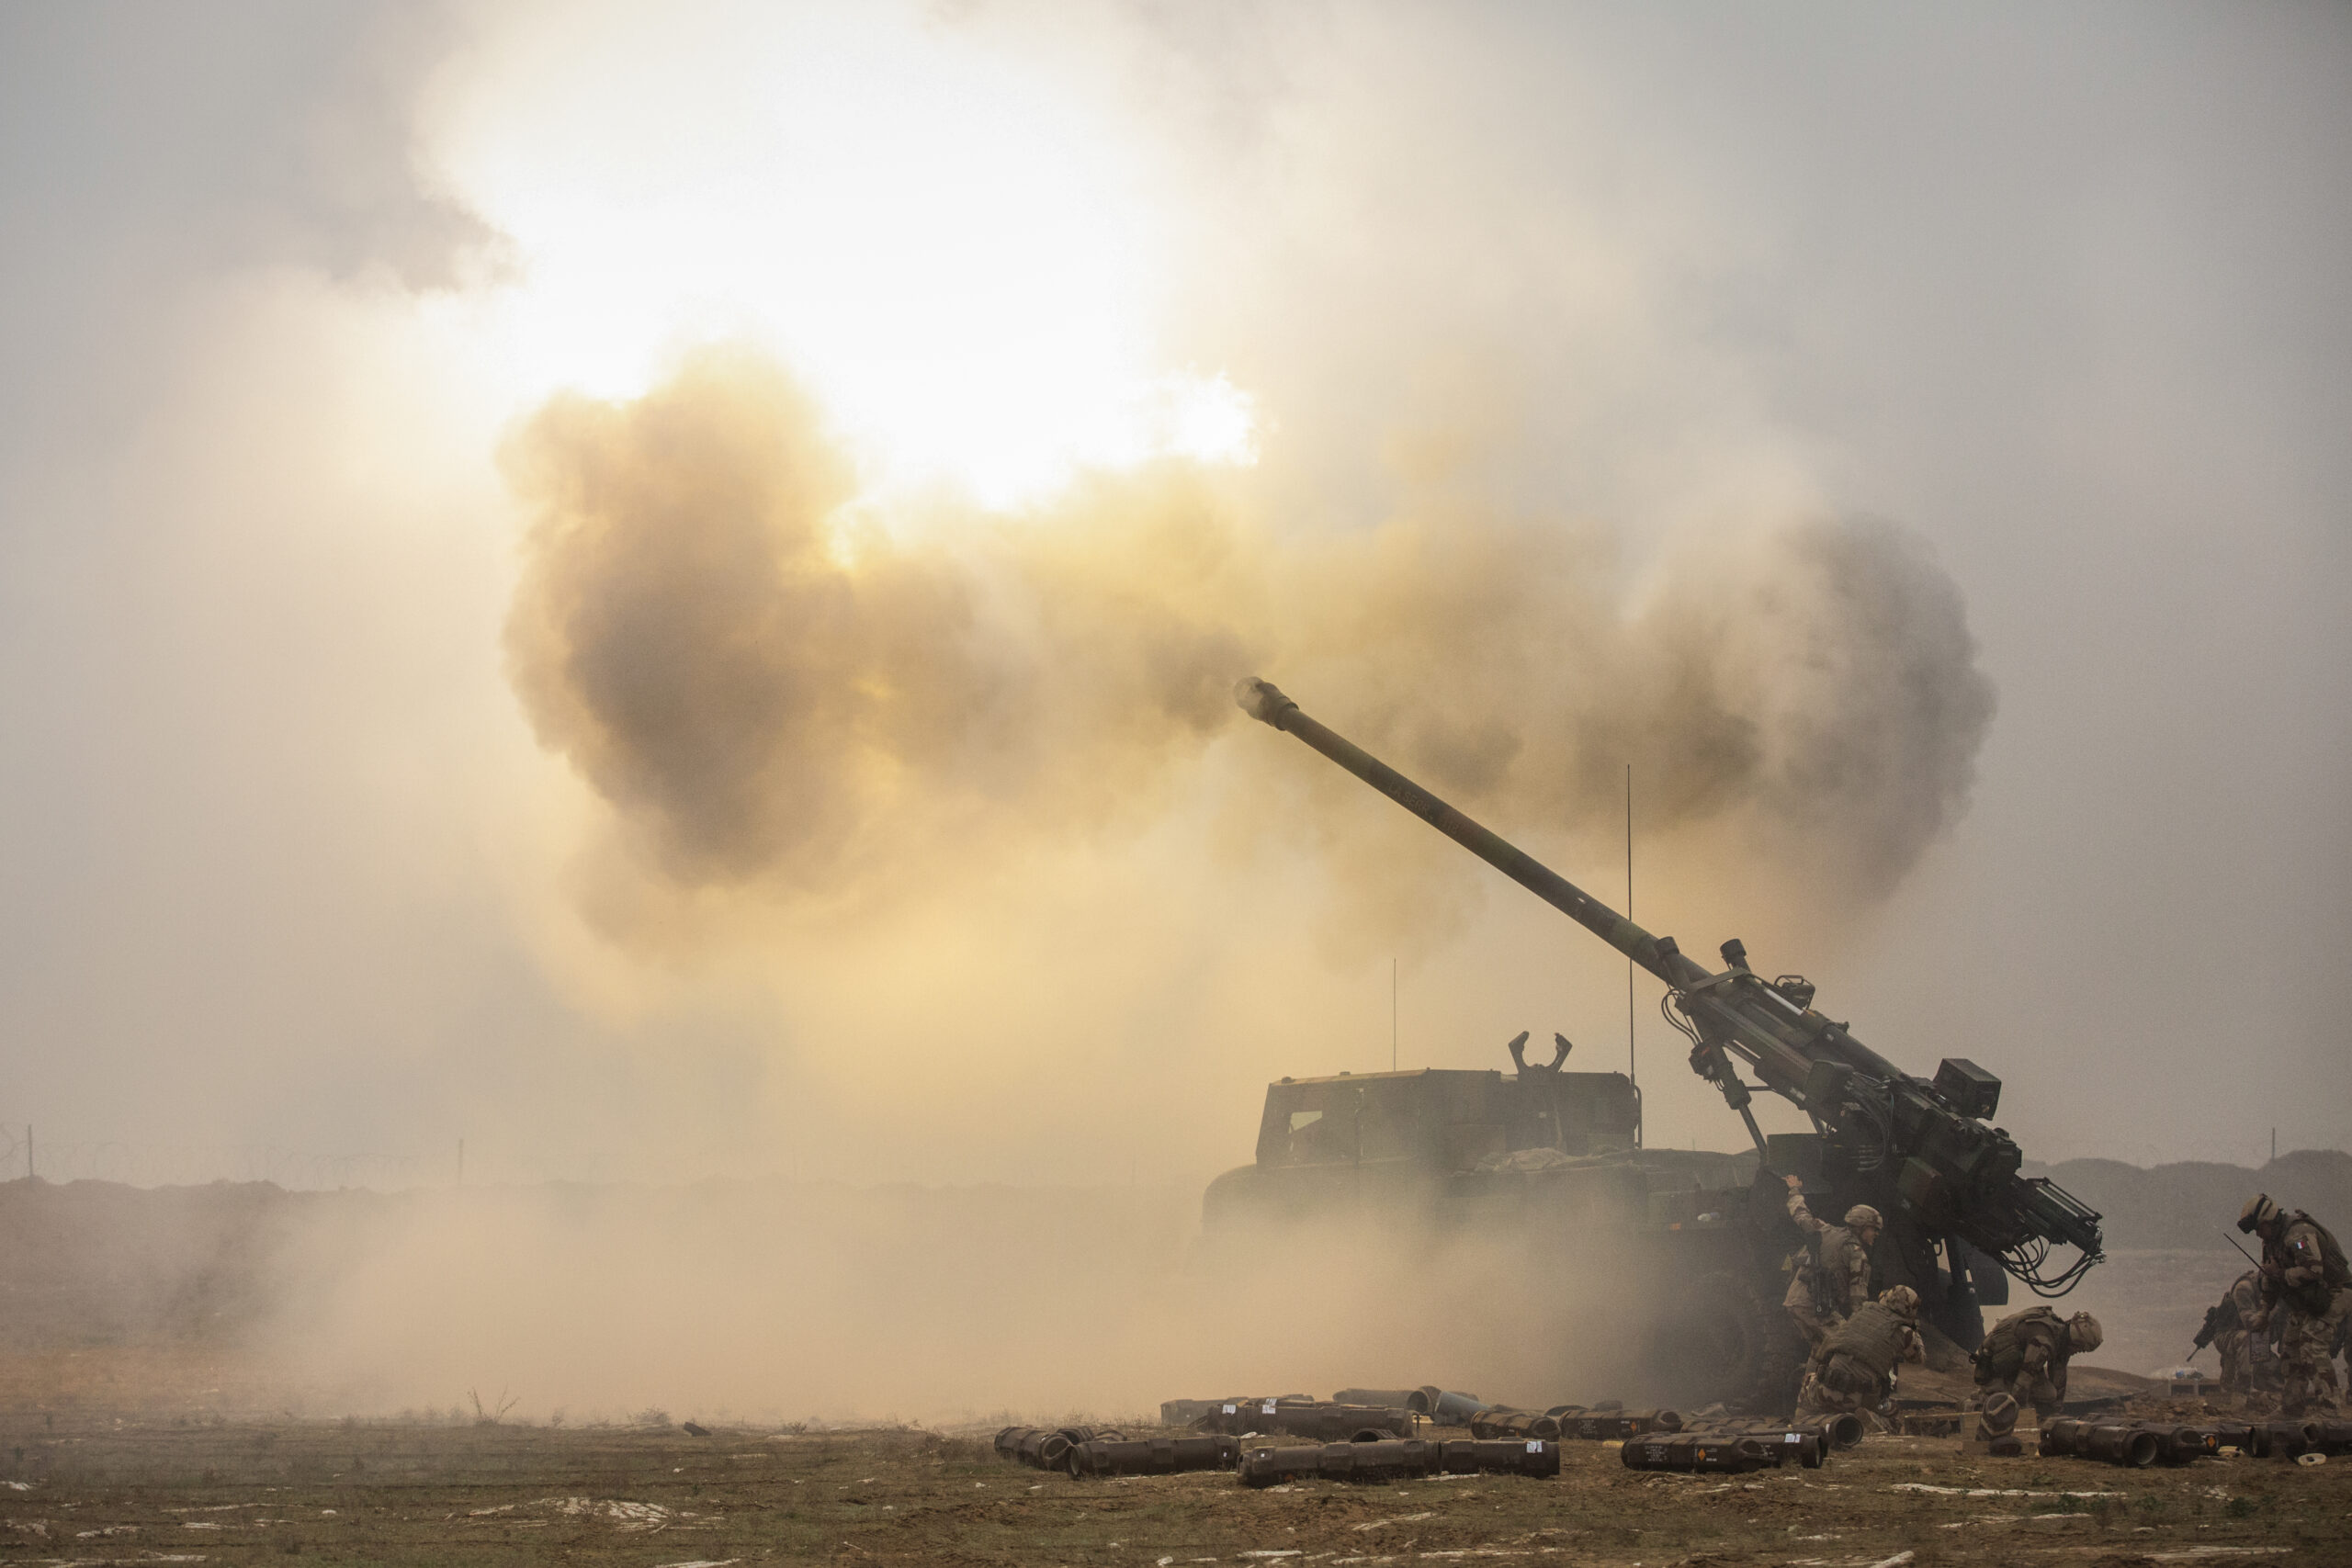 A French Caesar self-propelled howitzer fires into the Middle Euphrates River Valley in Southwest Asia, Iraq, Dec. 2, 2018. As part of the Combined Joint Task Force - Operation Inherent Resolve, they are supporting the Syrian Democratic Forces as they clear the last remaining pockets of ISIS from the Middle Euphrates River Valley and prevent them from fleeing into Iraq. In conjunction with partner forces, Combined Joint Task Force – Operation Inherent Resolve defeats ISIS in designated areas of Iraq and Syria and sets conditions for follow-on operations to increase regional stability. (U.S. Army photo by Sgt. 1st Class Mikki L. Sprenkle)